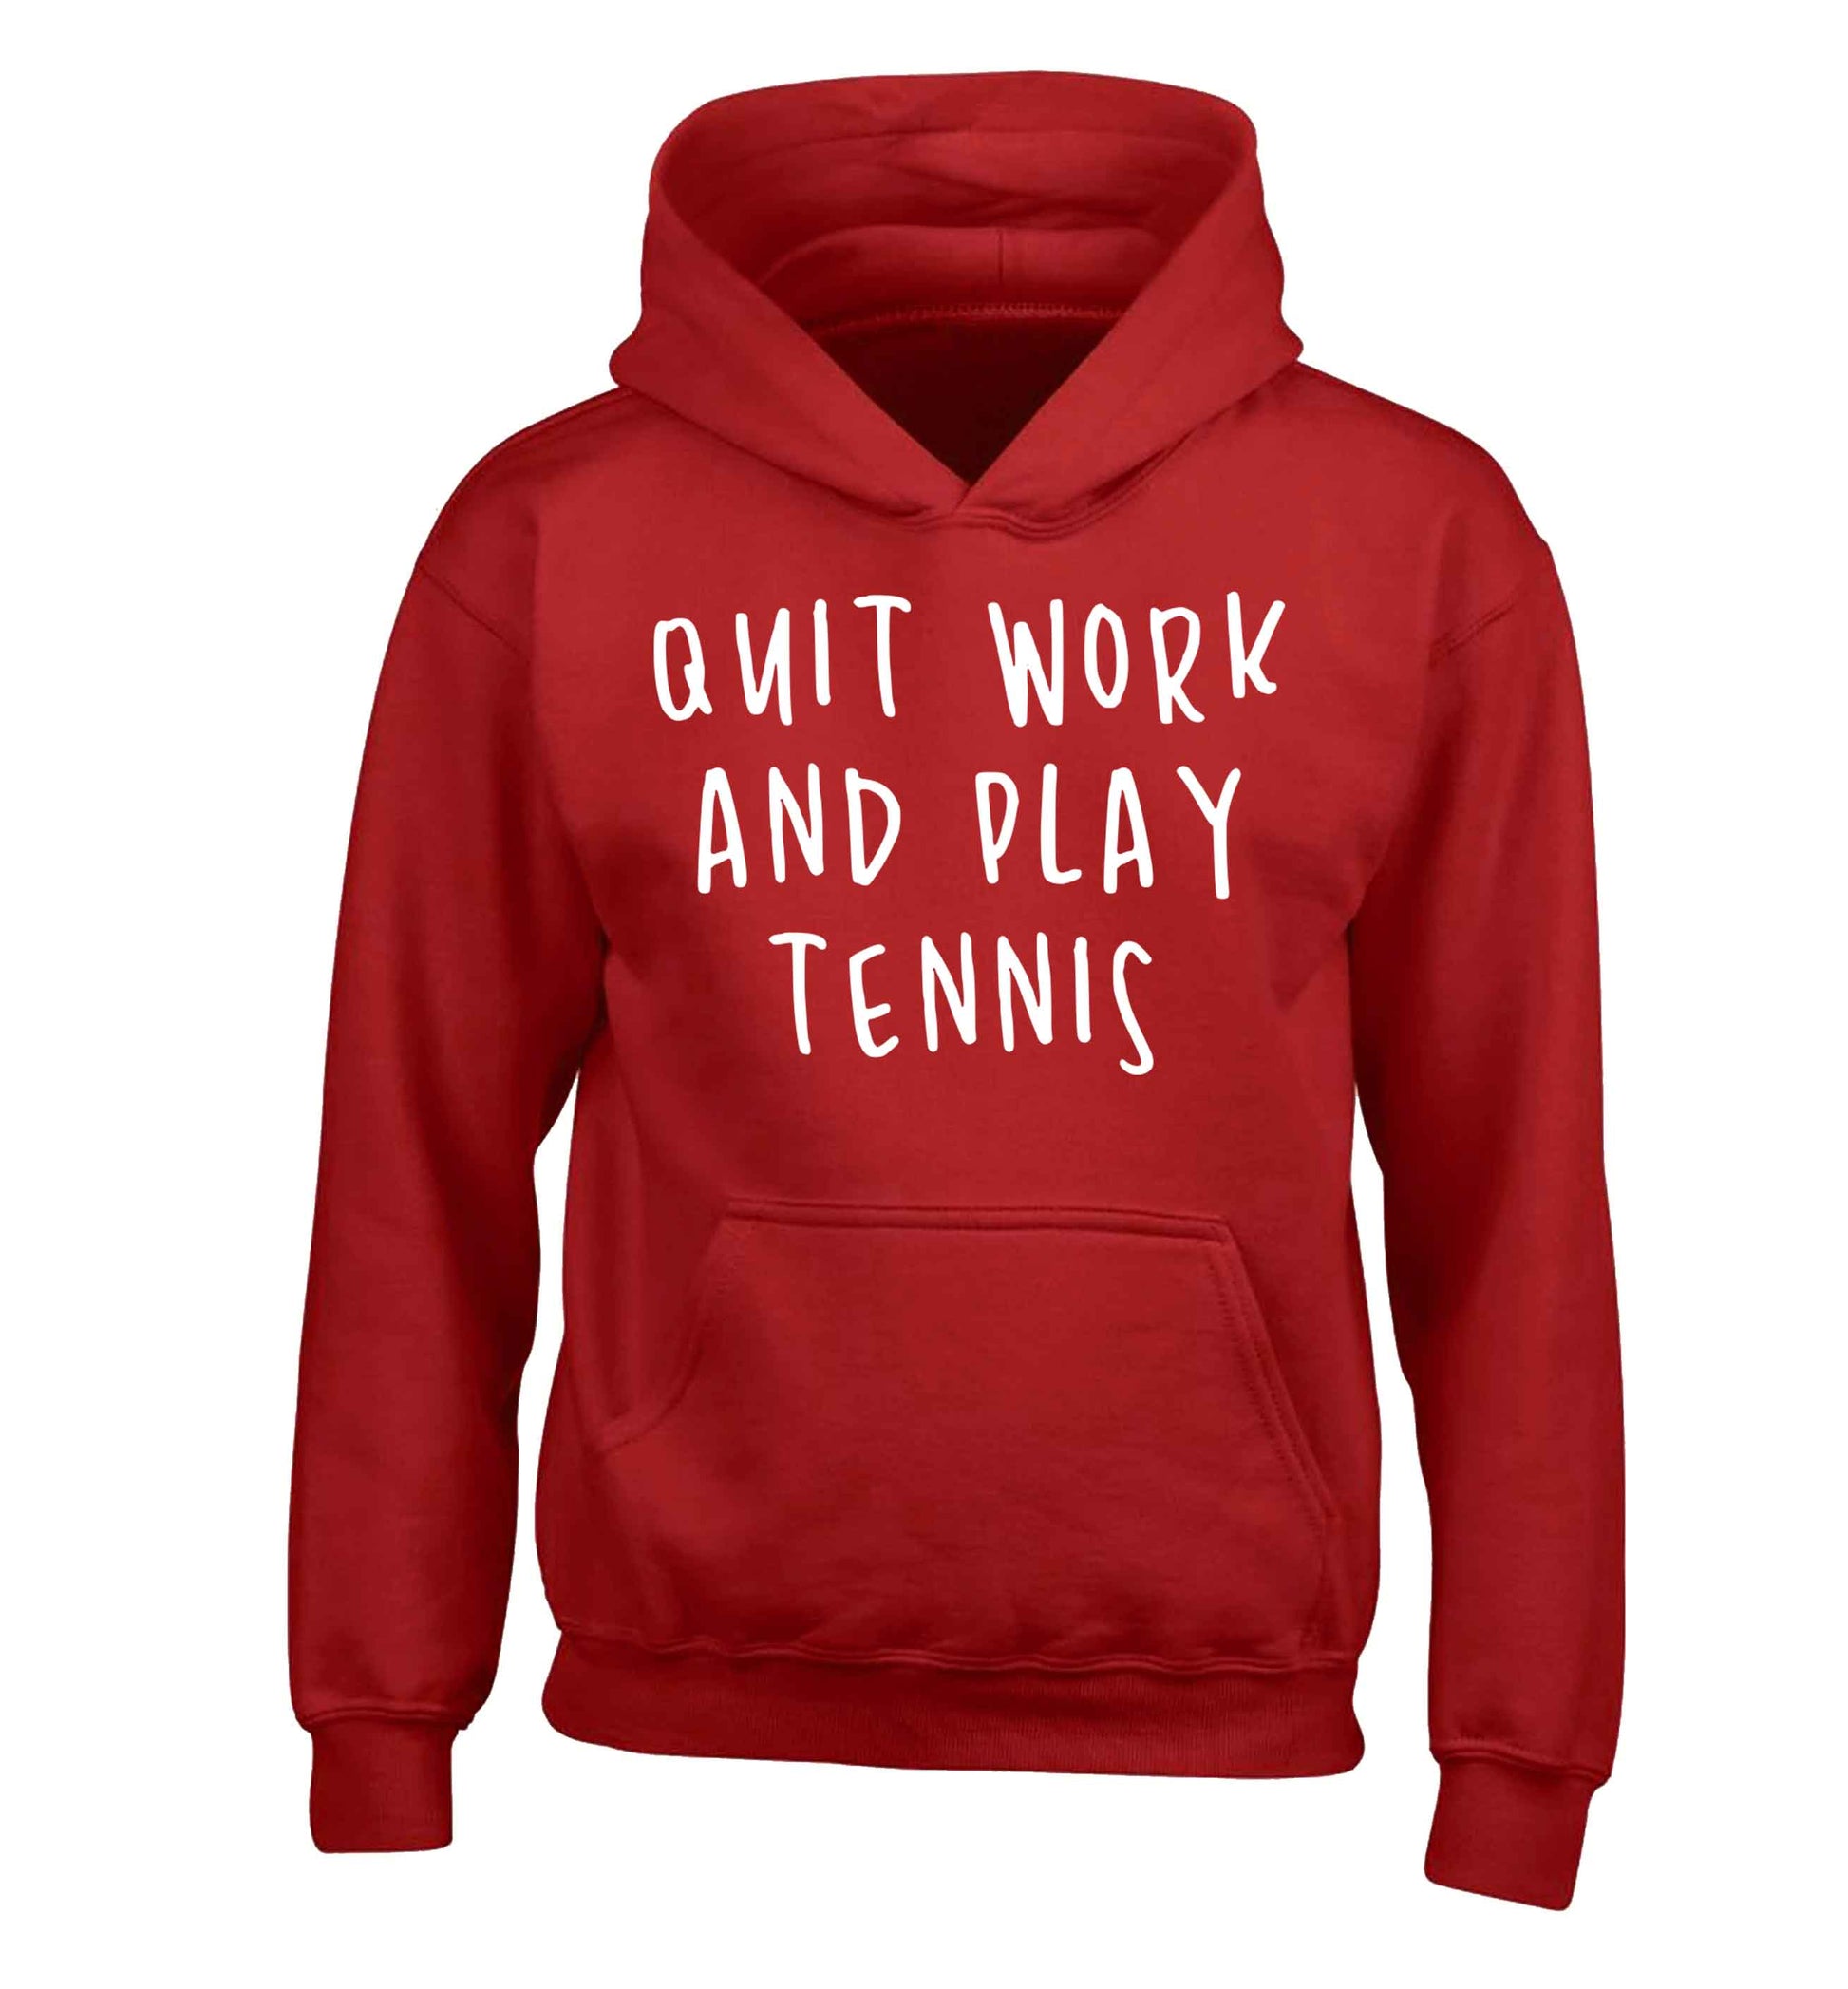 Quit work and play tennis children's red hoodie 12-13 Years